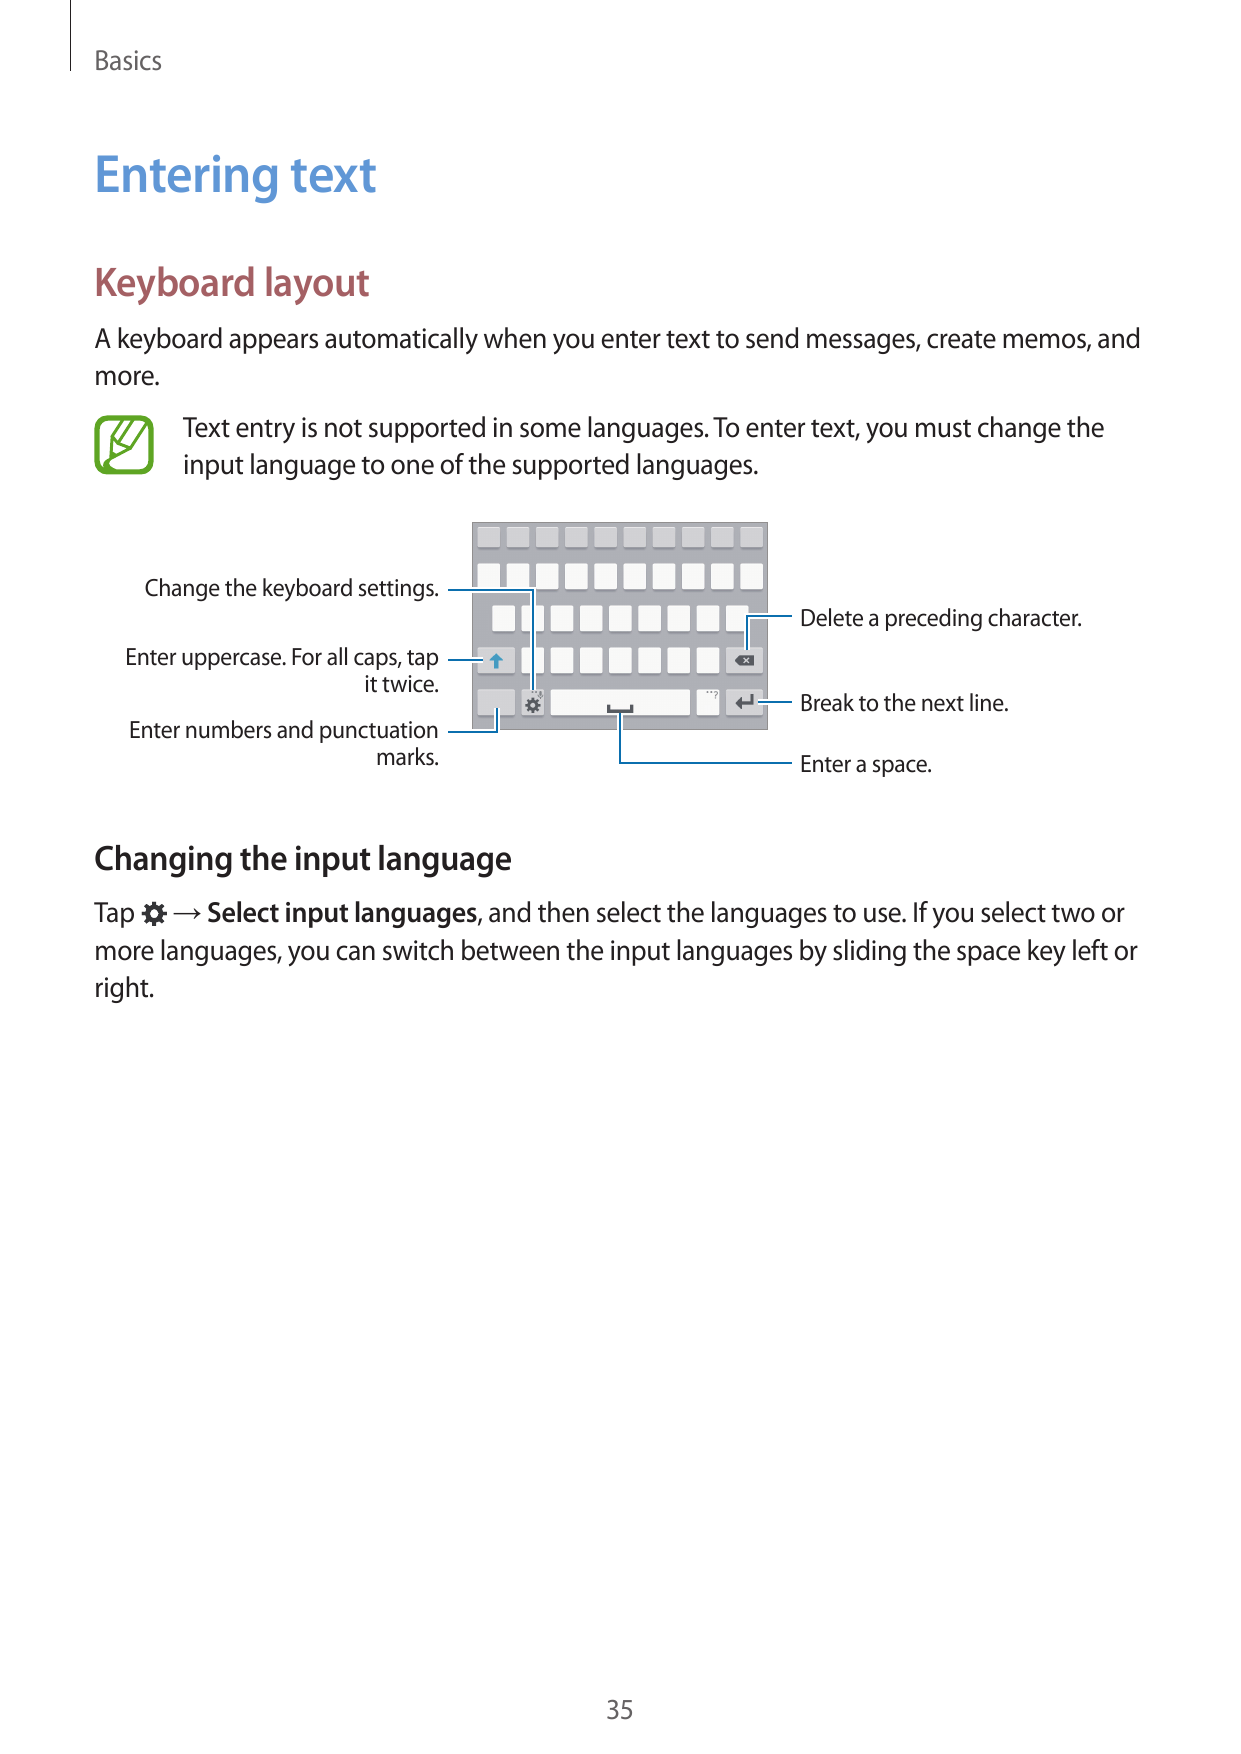 BasicsEntering textKeyboard layoutA keyboard appears automatically when you enter text to send messages, create memos, andmore.T